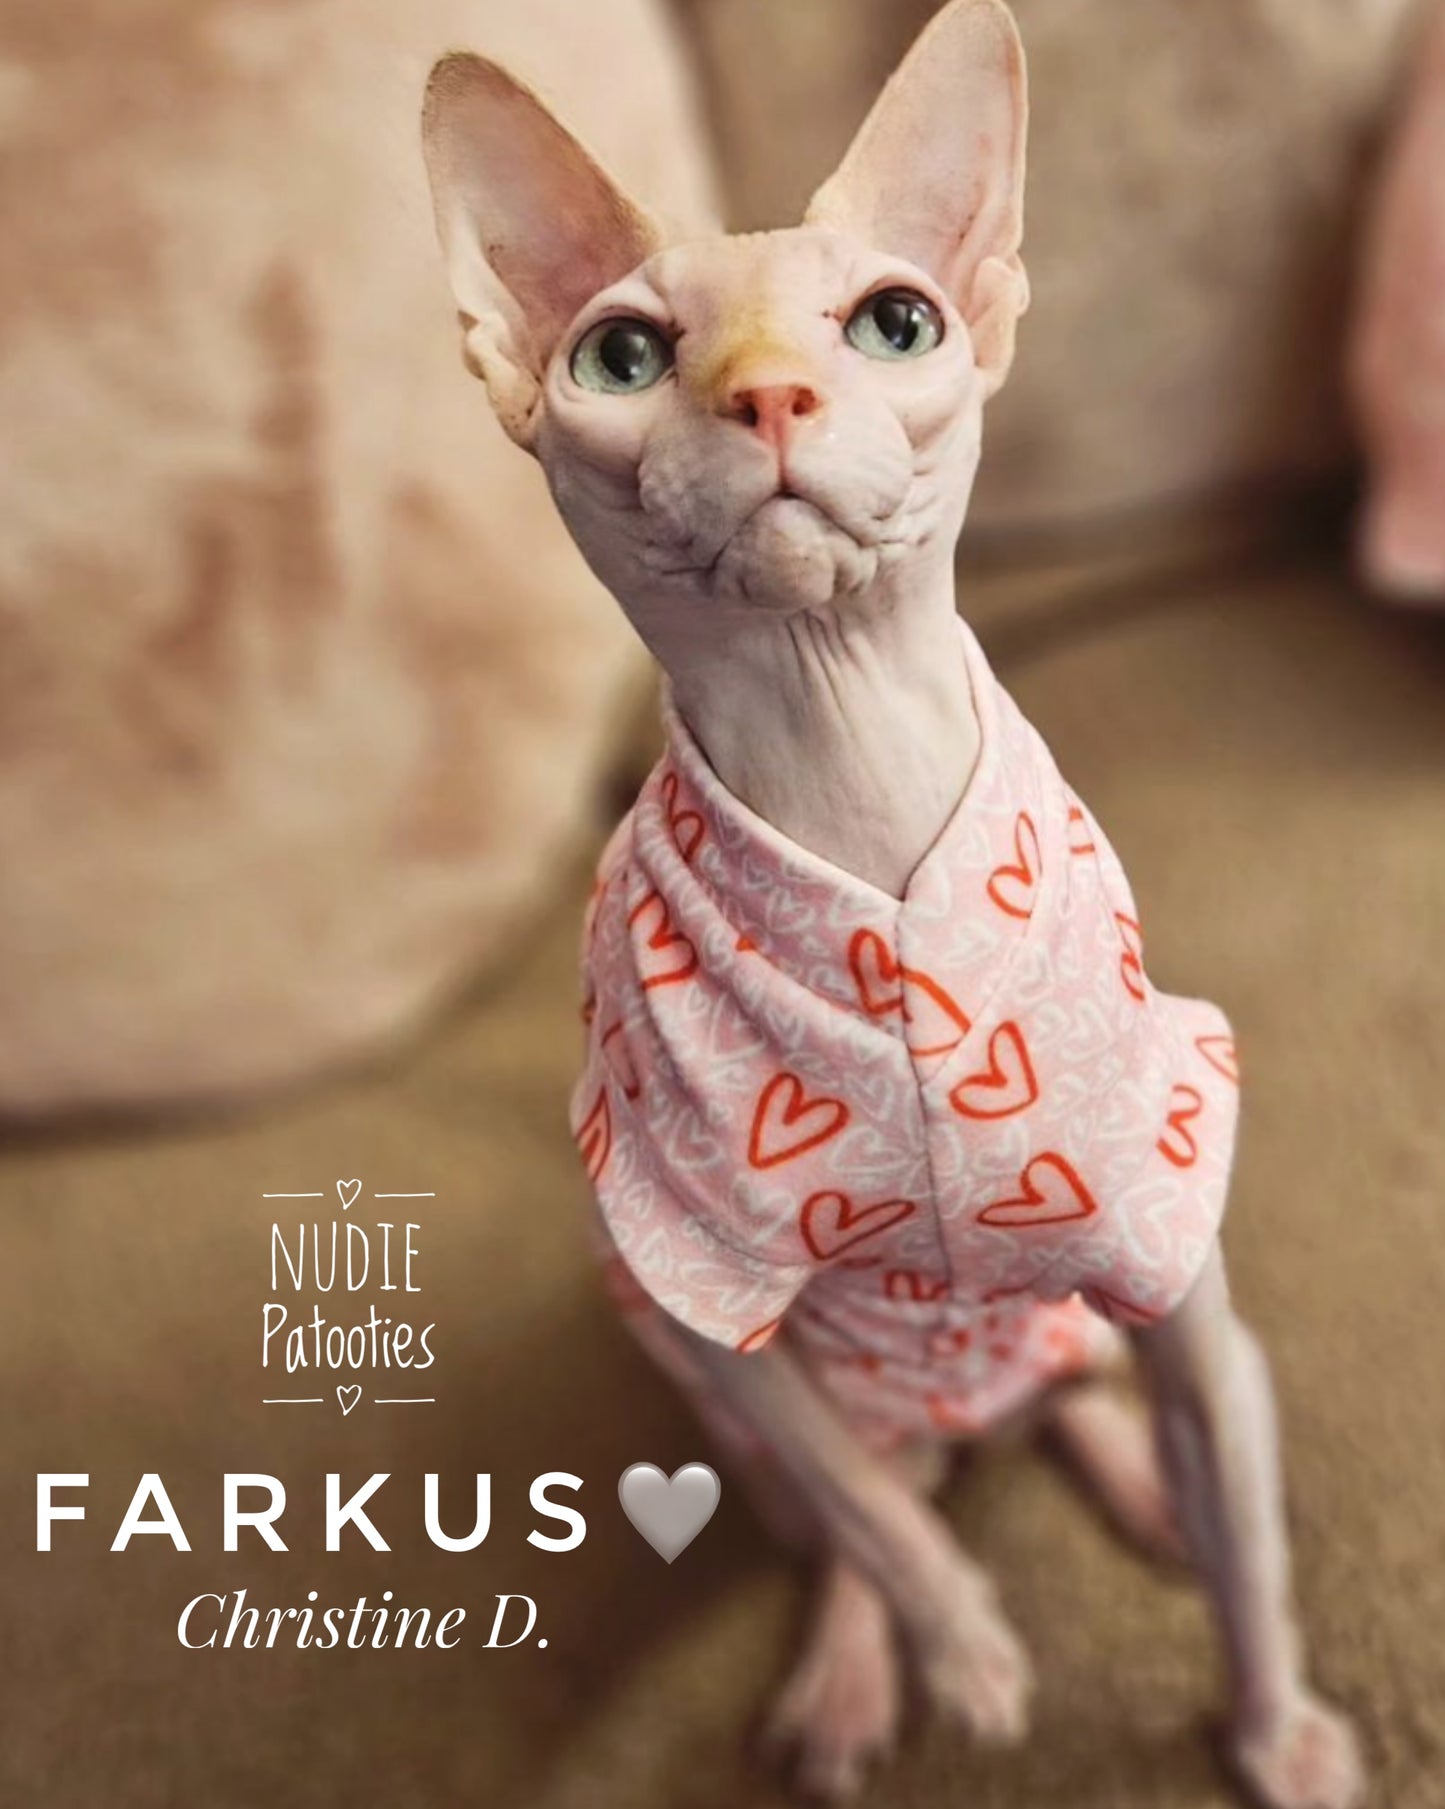 Sphynx cat and kitten shirt.  Sphynx cat clothes.